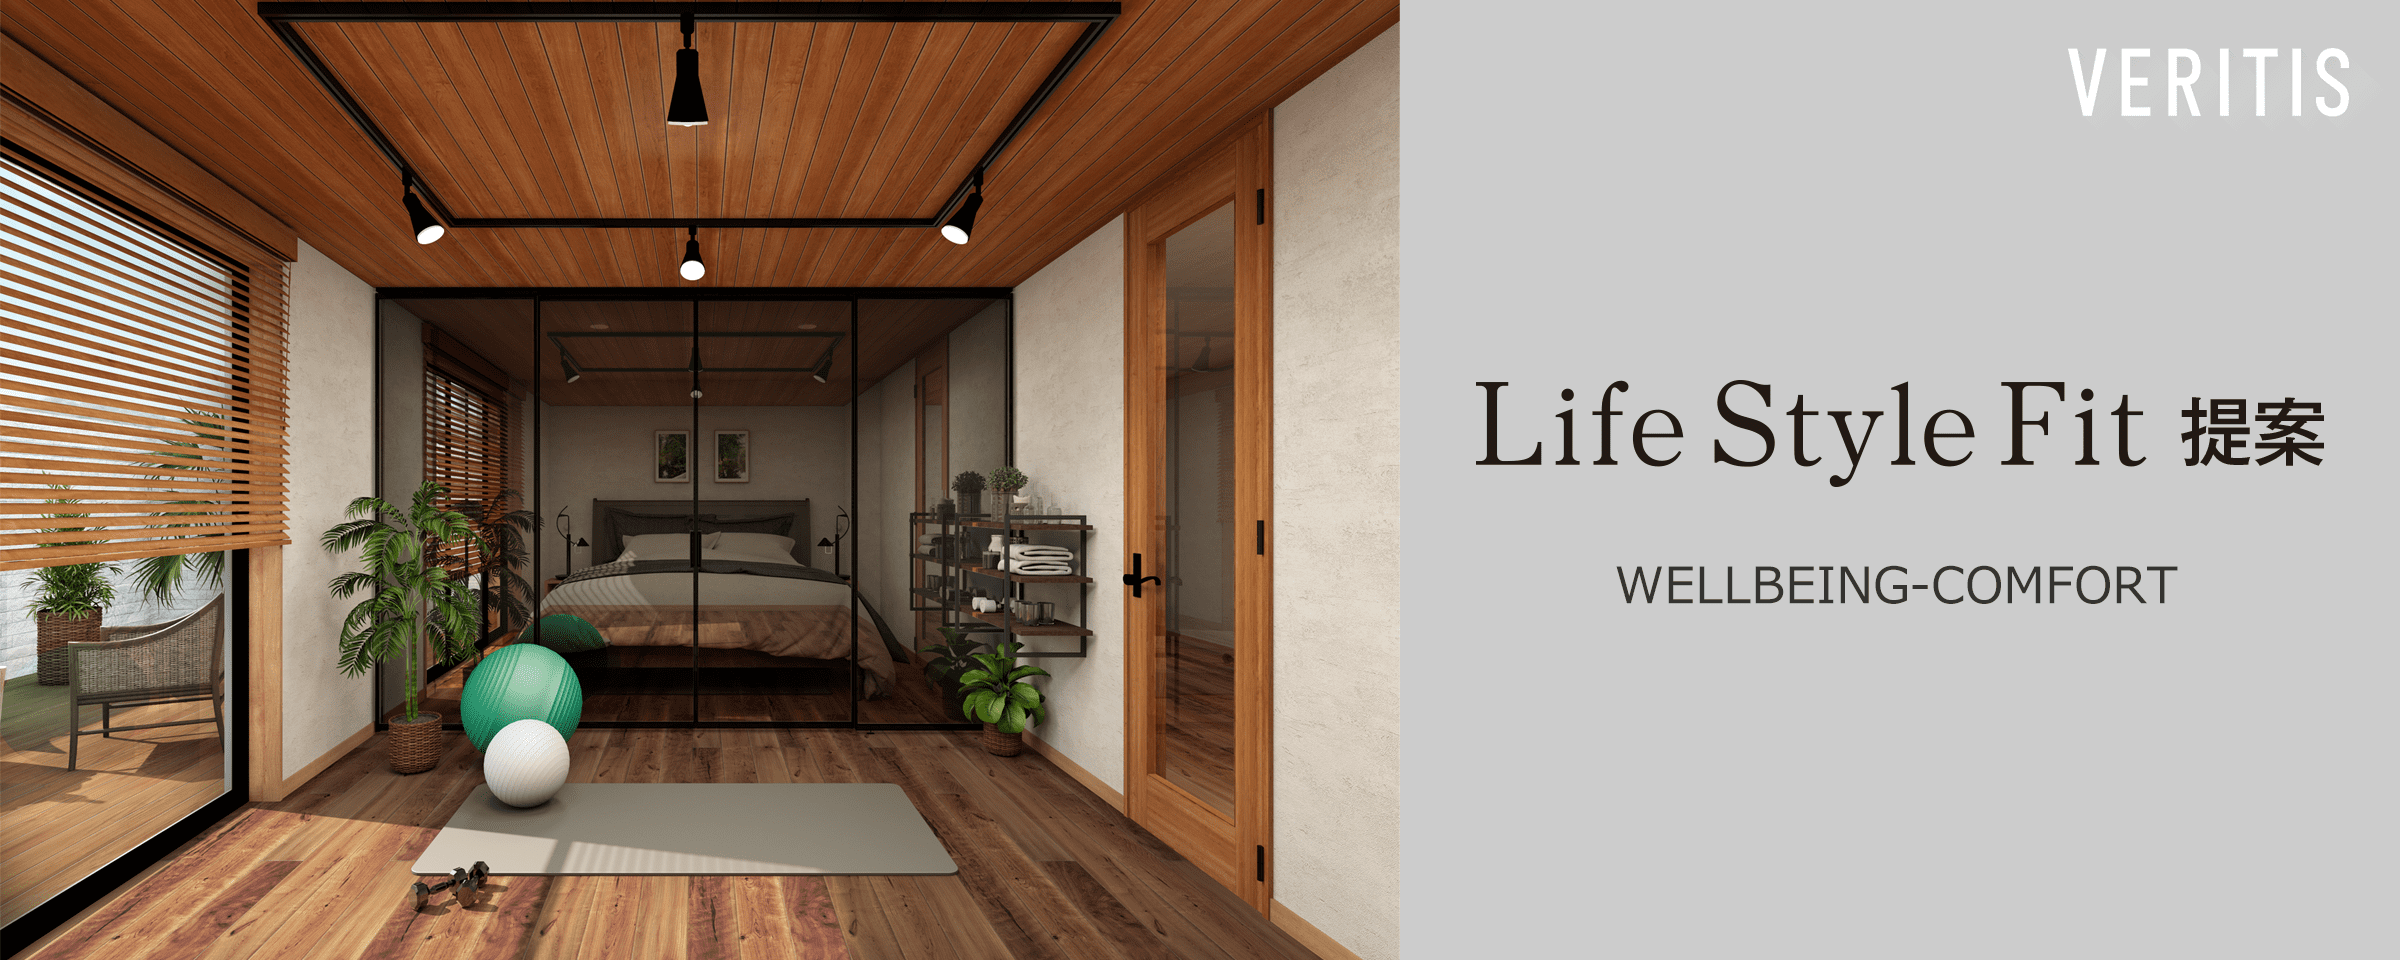 Life style Fit 提案 WELLBEING-COMFORT